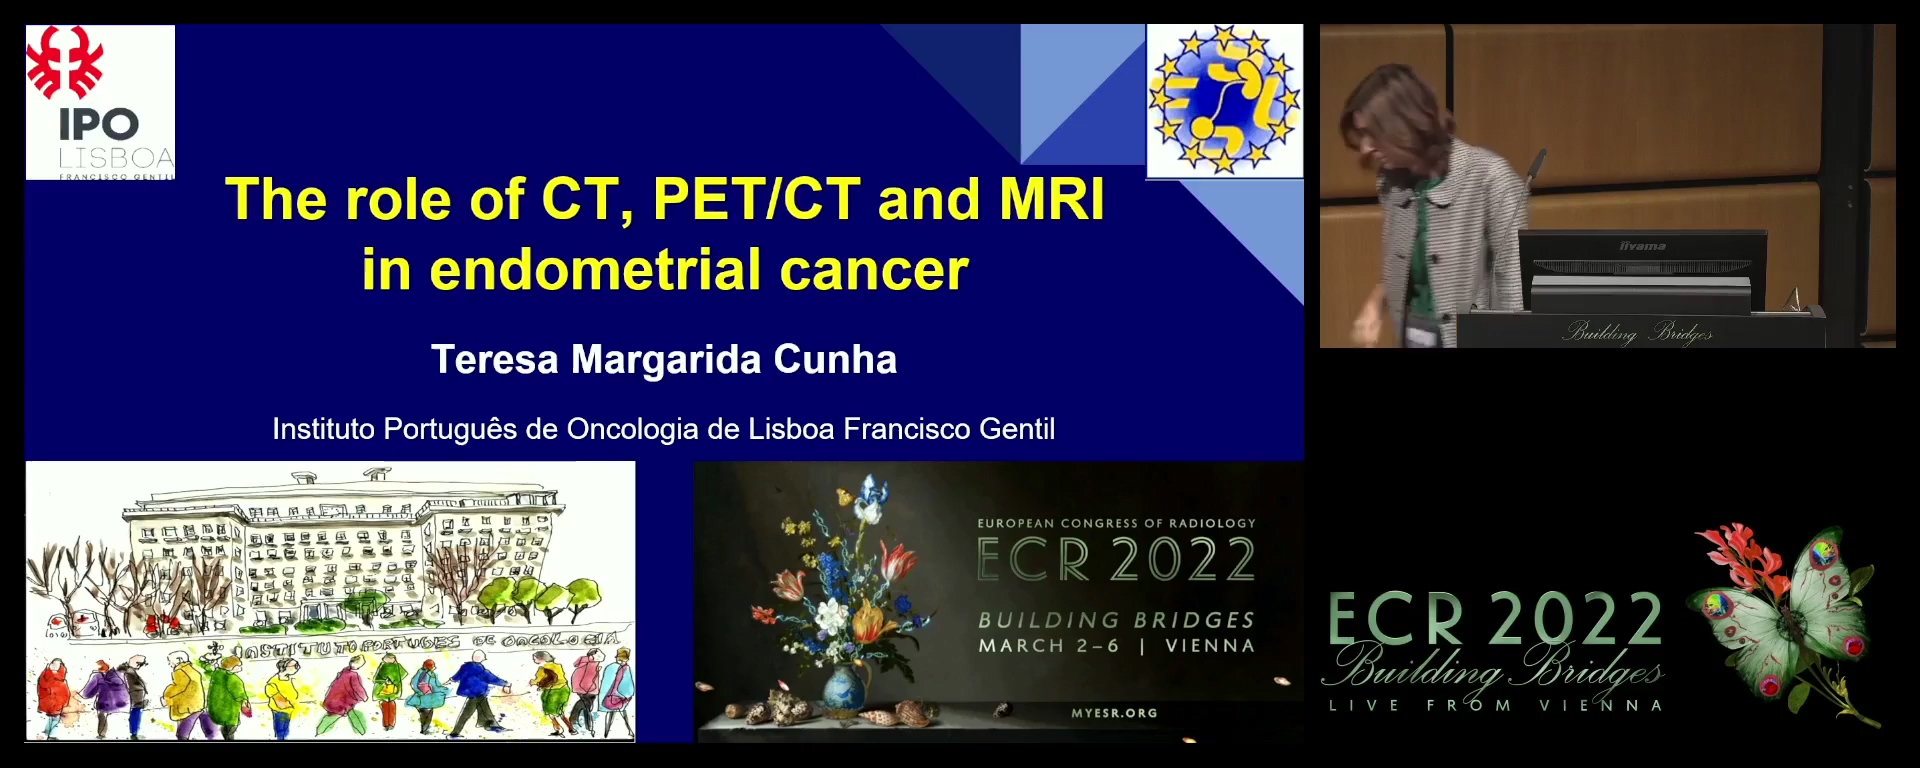 The role of CT, PET/CT, and MRI in endometrial cancer